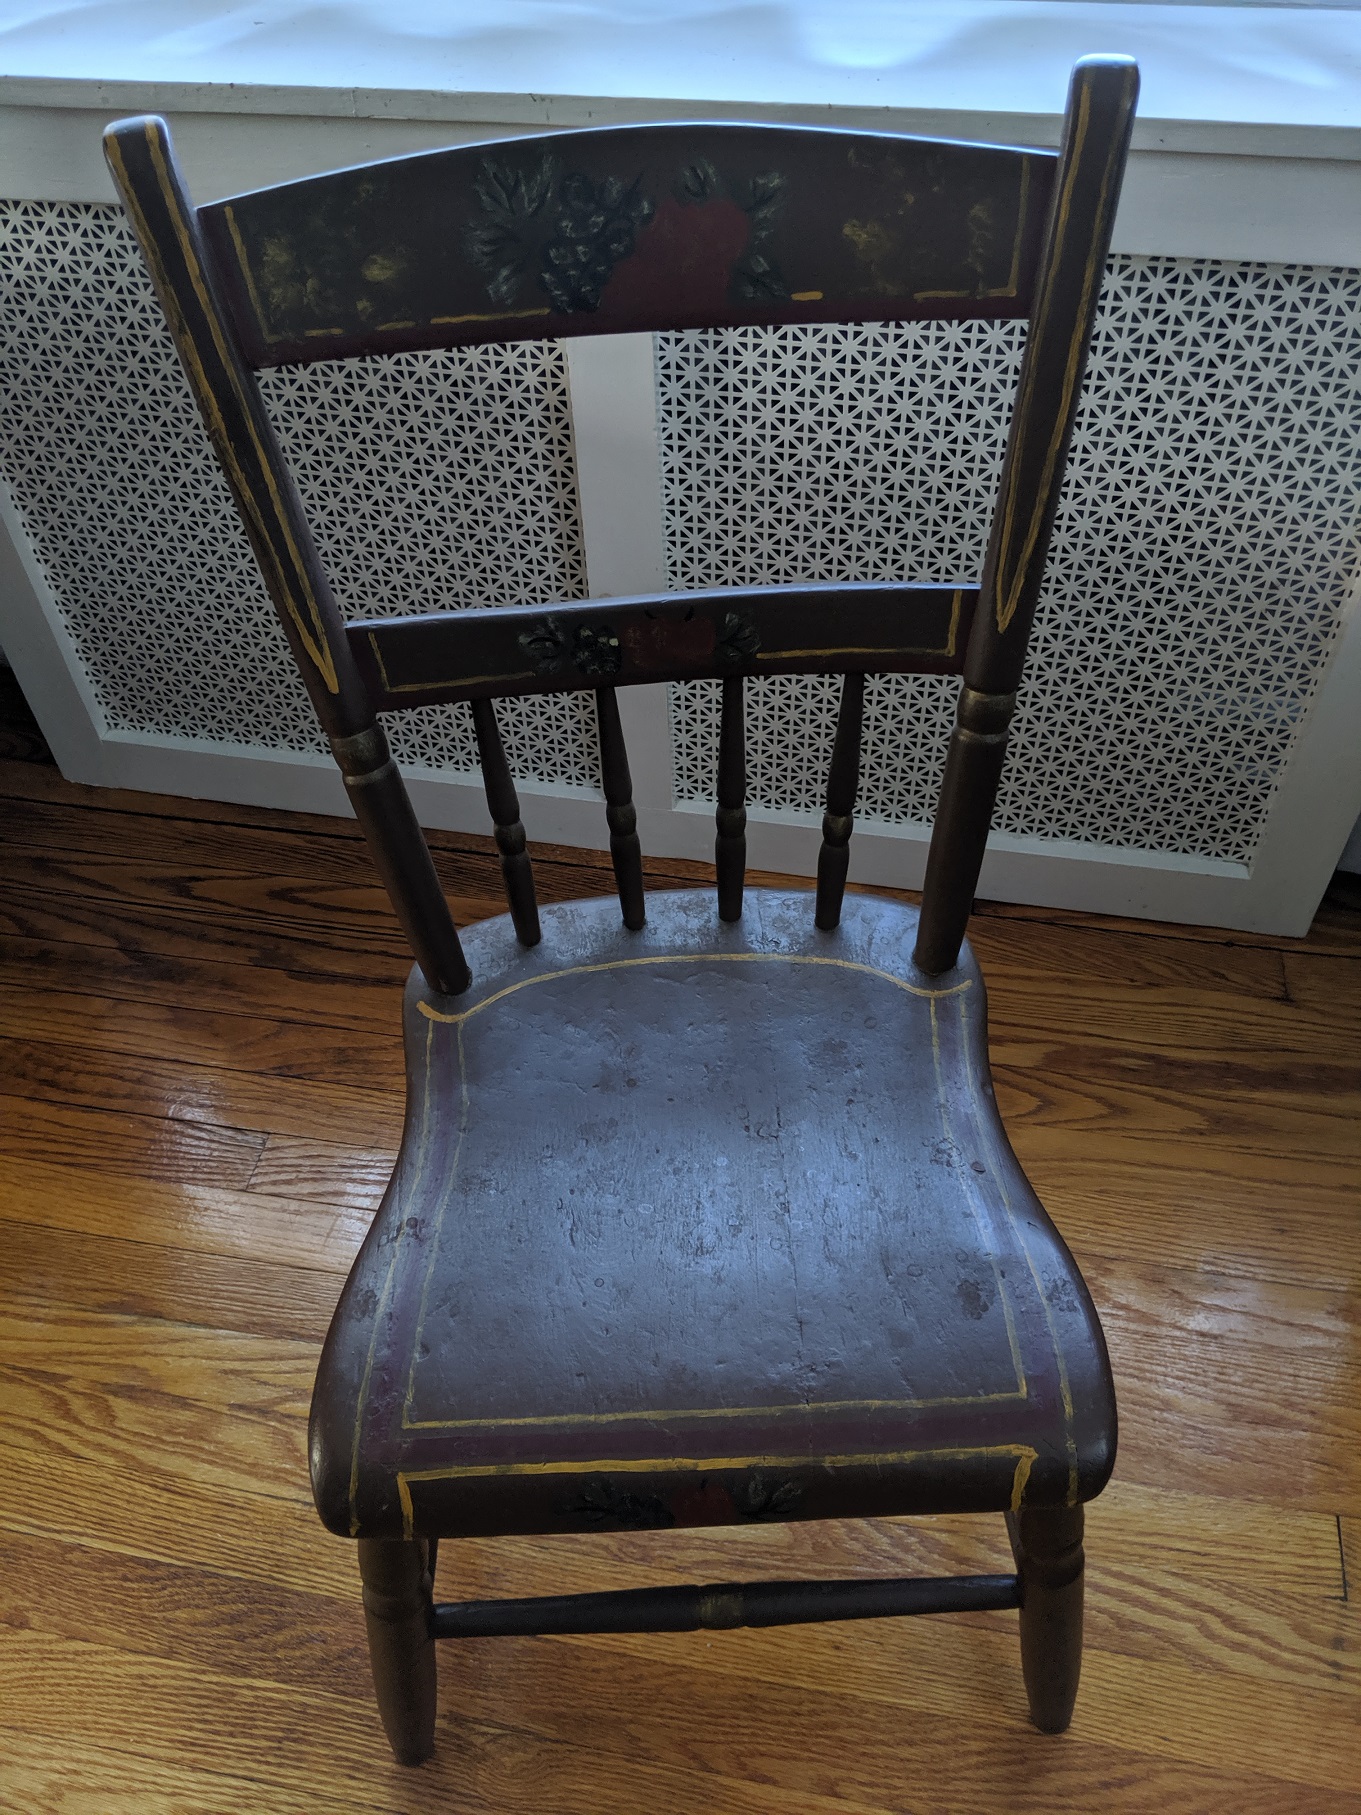 Nj Pa Antique Chairs Tables Antiques Board